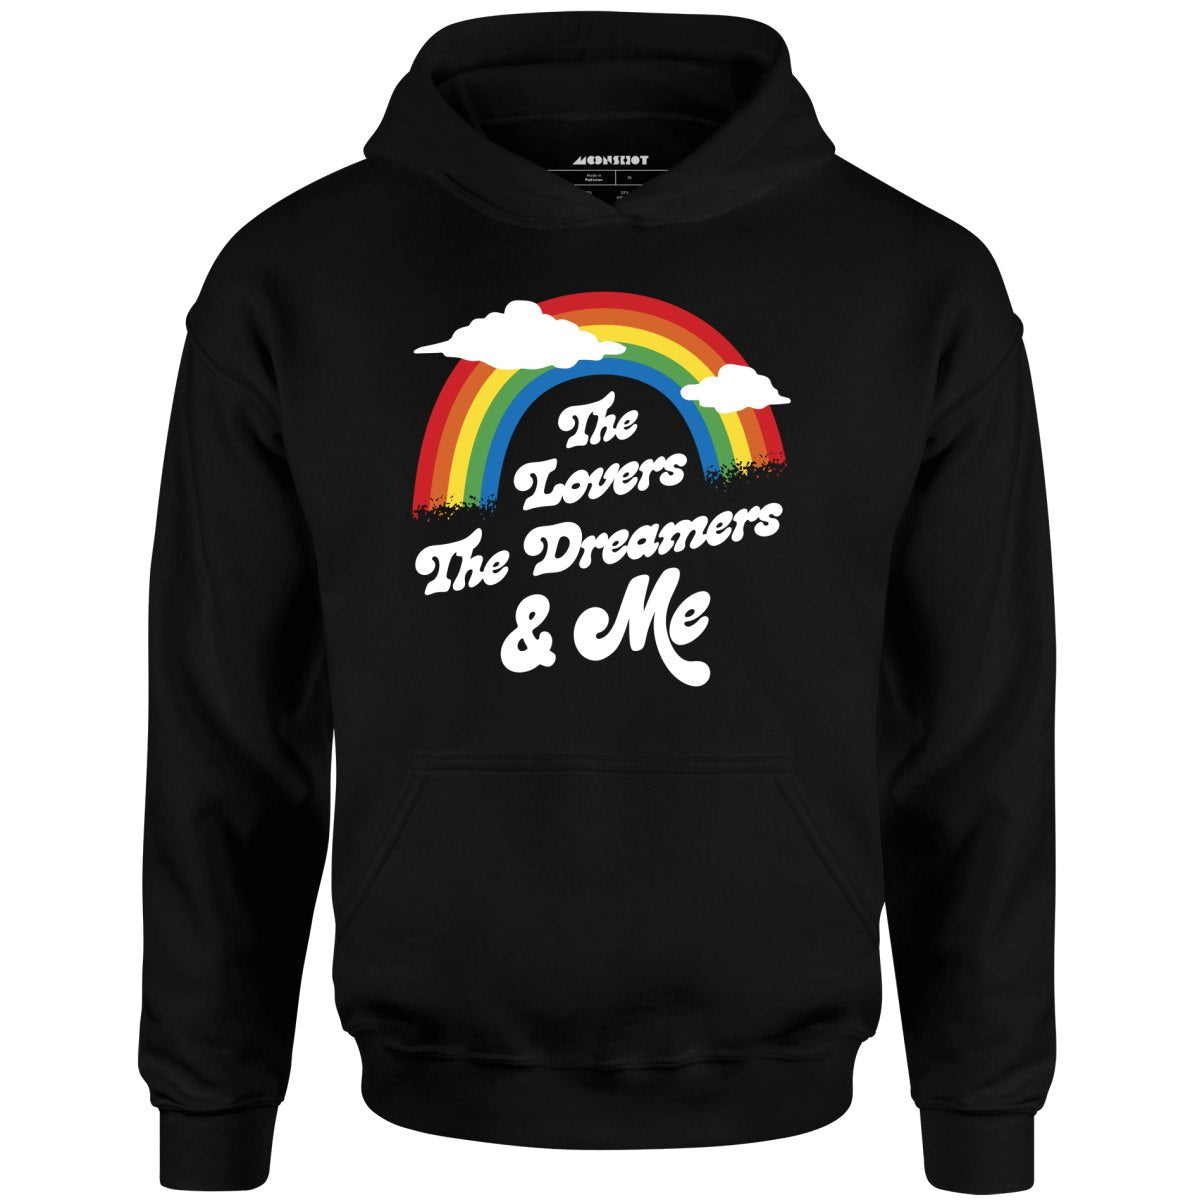 The Lovers The Dreamers & Me - Unisex Hoodie